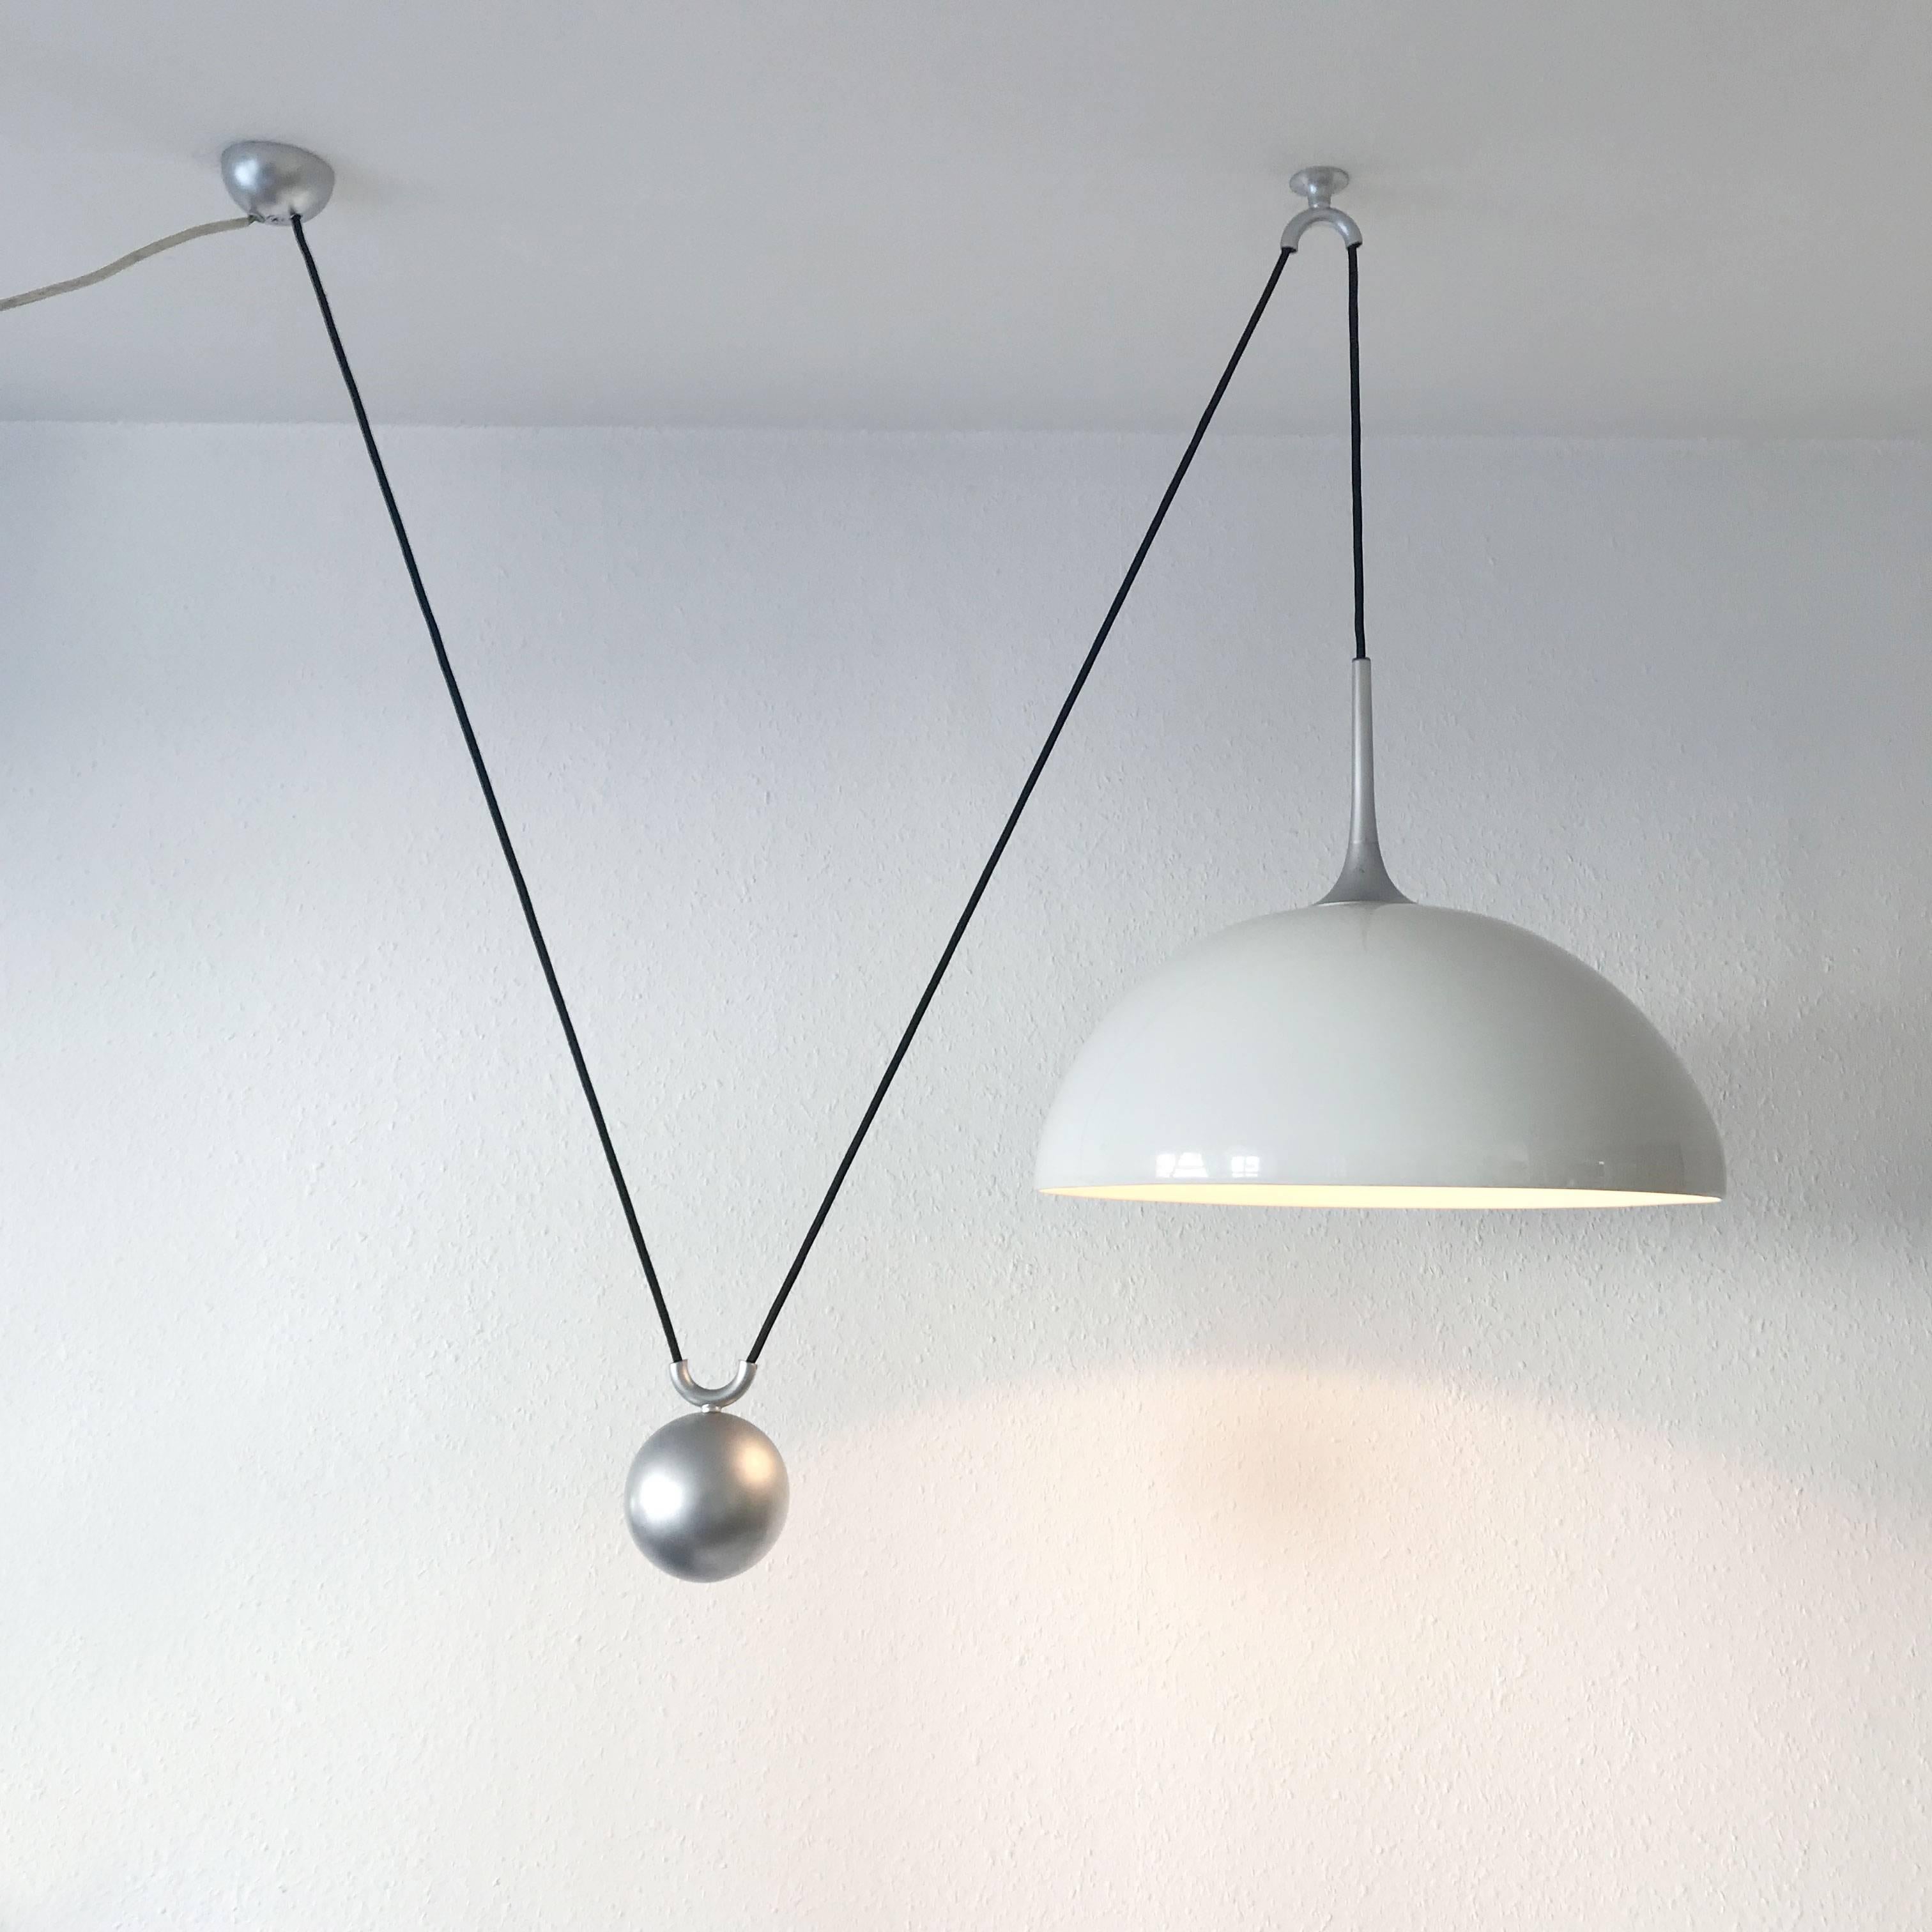 Counterweight pendant lamp by Florian Schulz, Germany. Executed with nickel-plated brass and porcelain lampshade. The lamp needs one E27 Edison screw fit bulb. Adjustable total height (the cord is 78.74 inch / 200 cm).